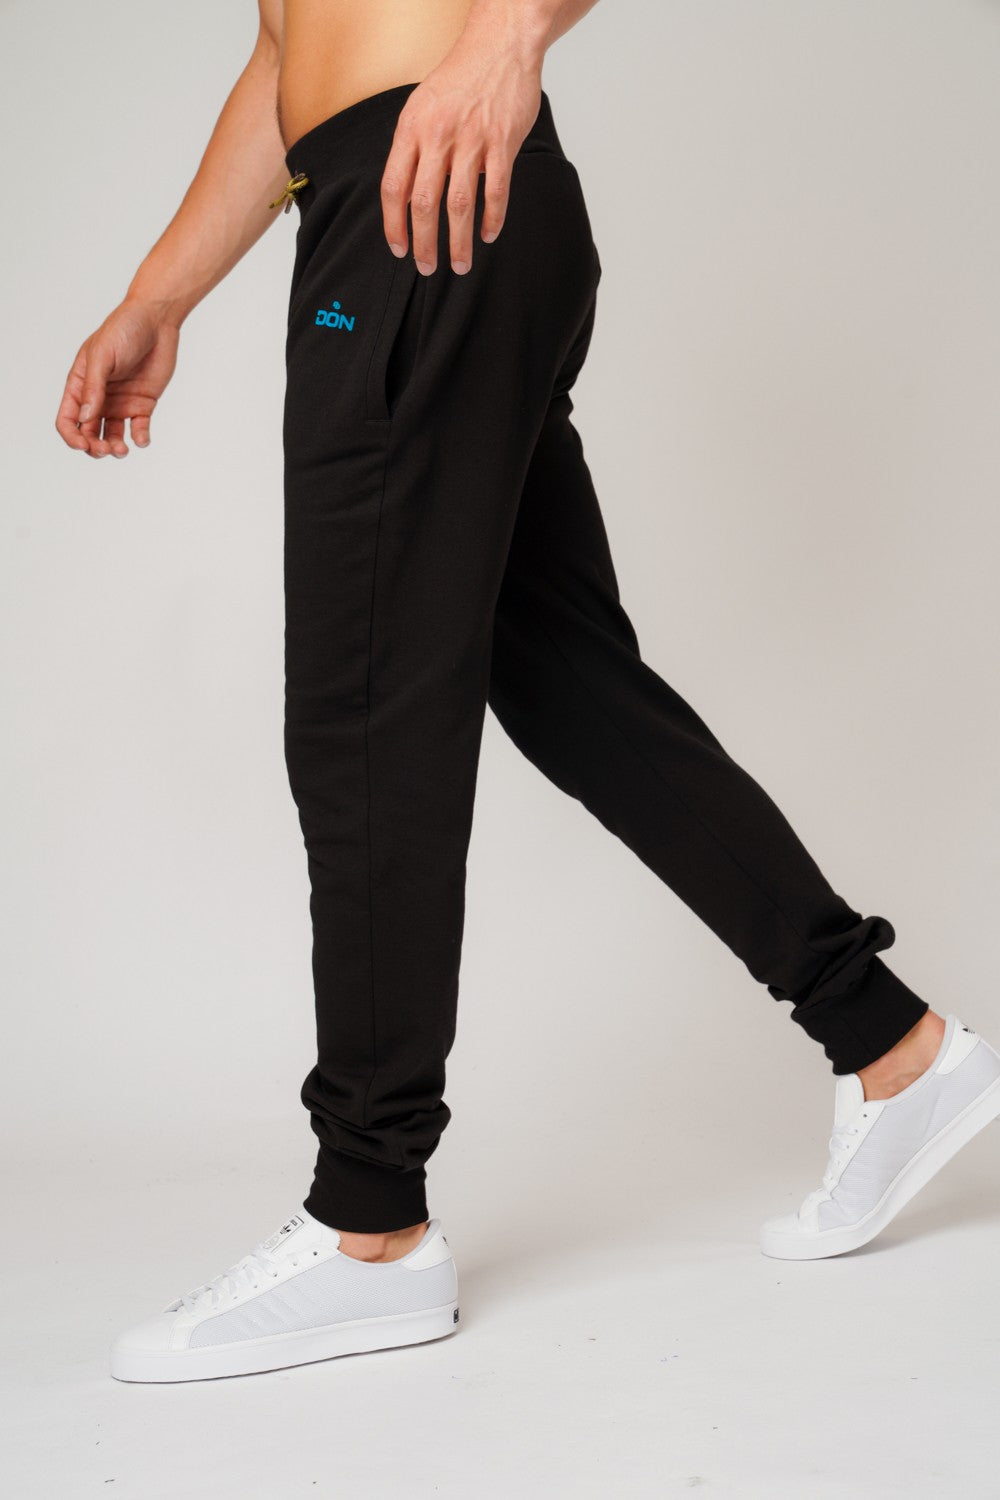 DON BLACK & TEAL JOGGERS